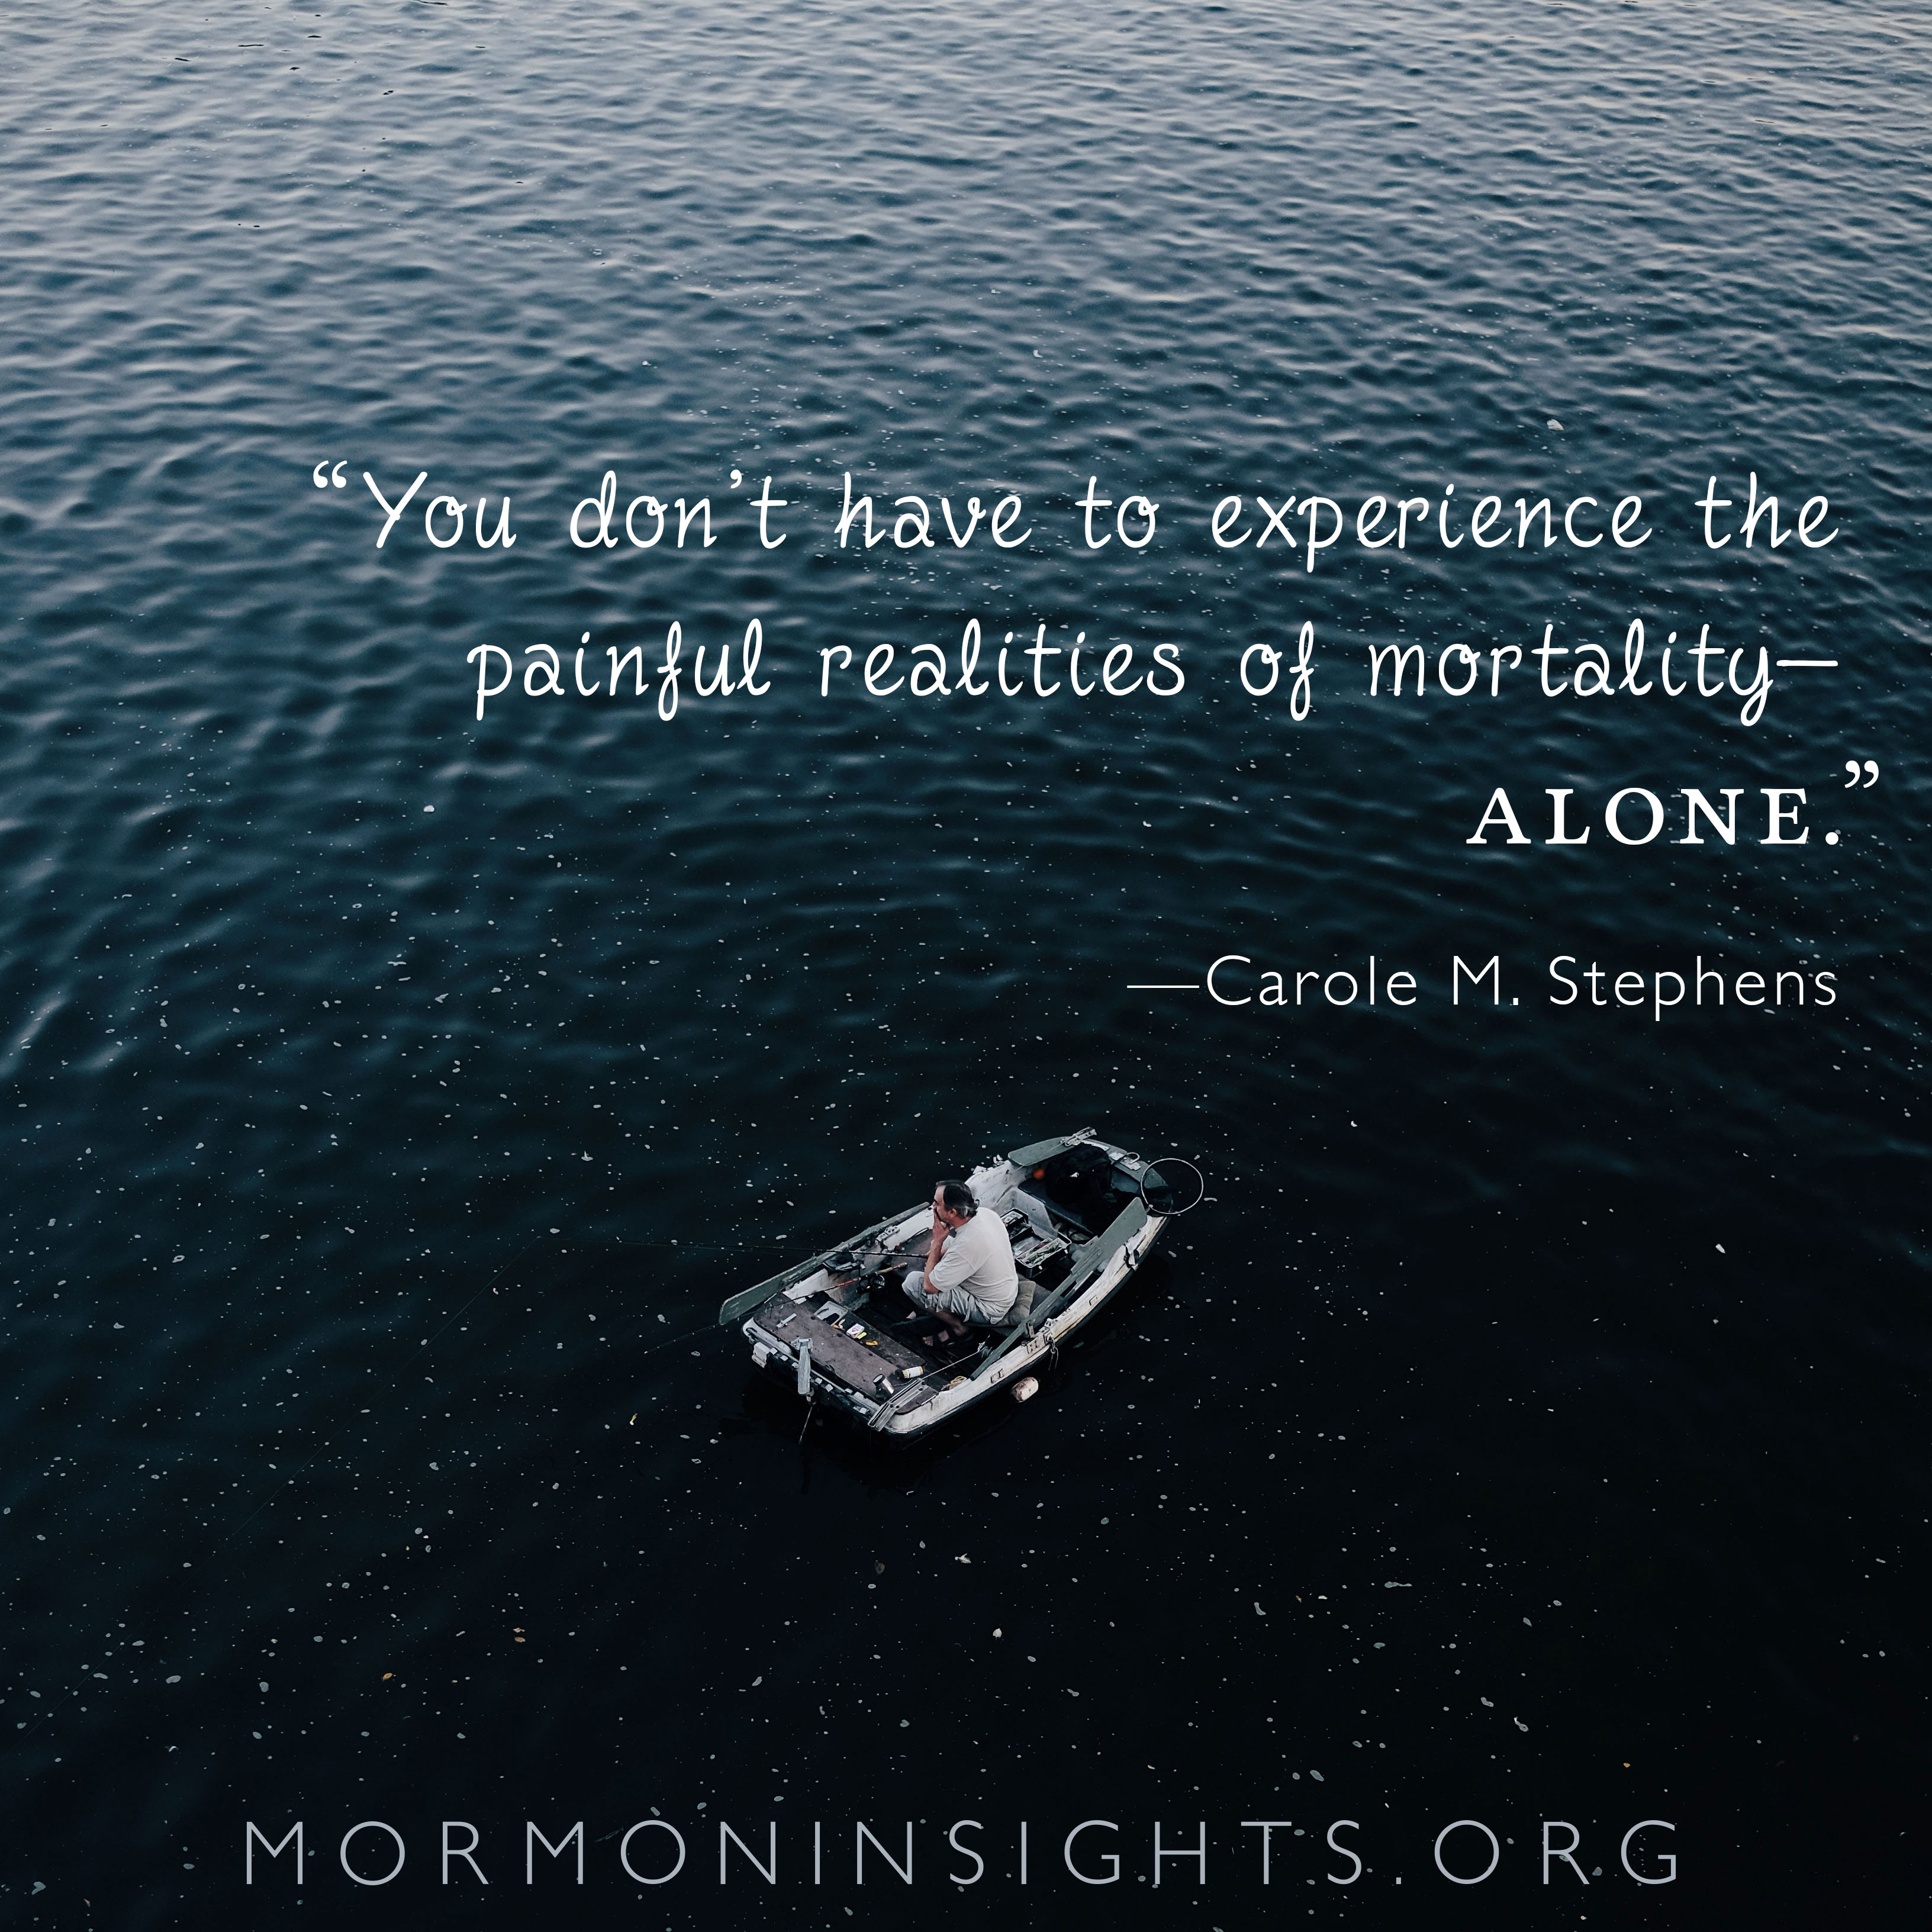 You don't have to xperience the painful realities of mortality alone.